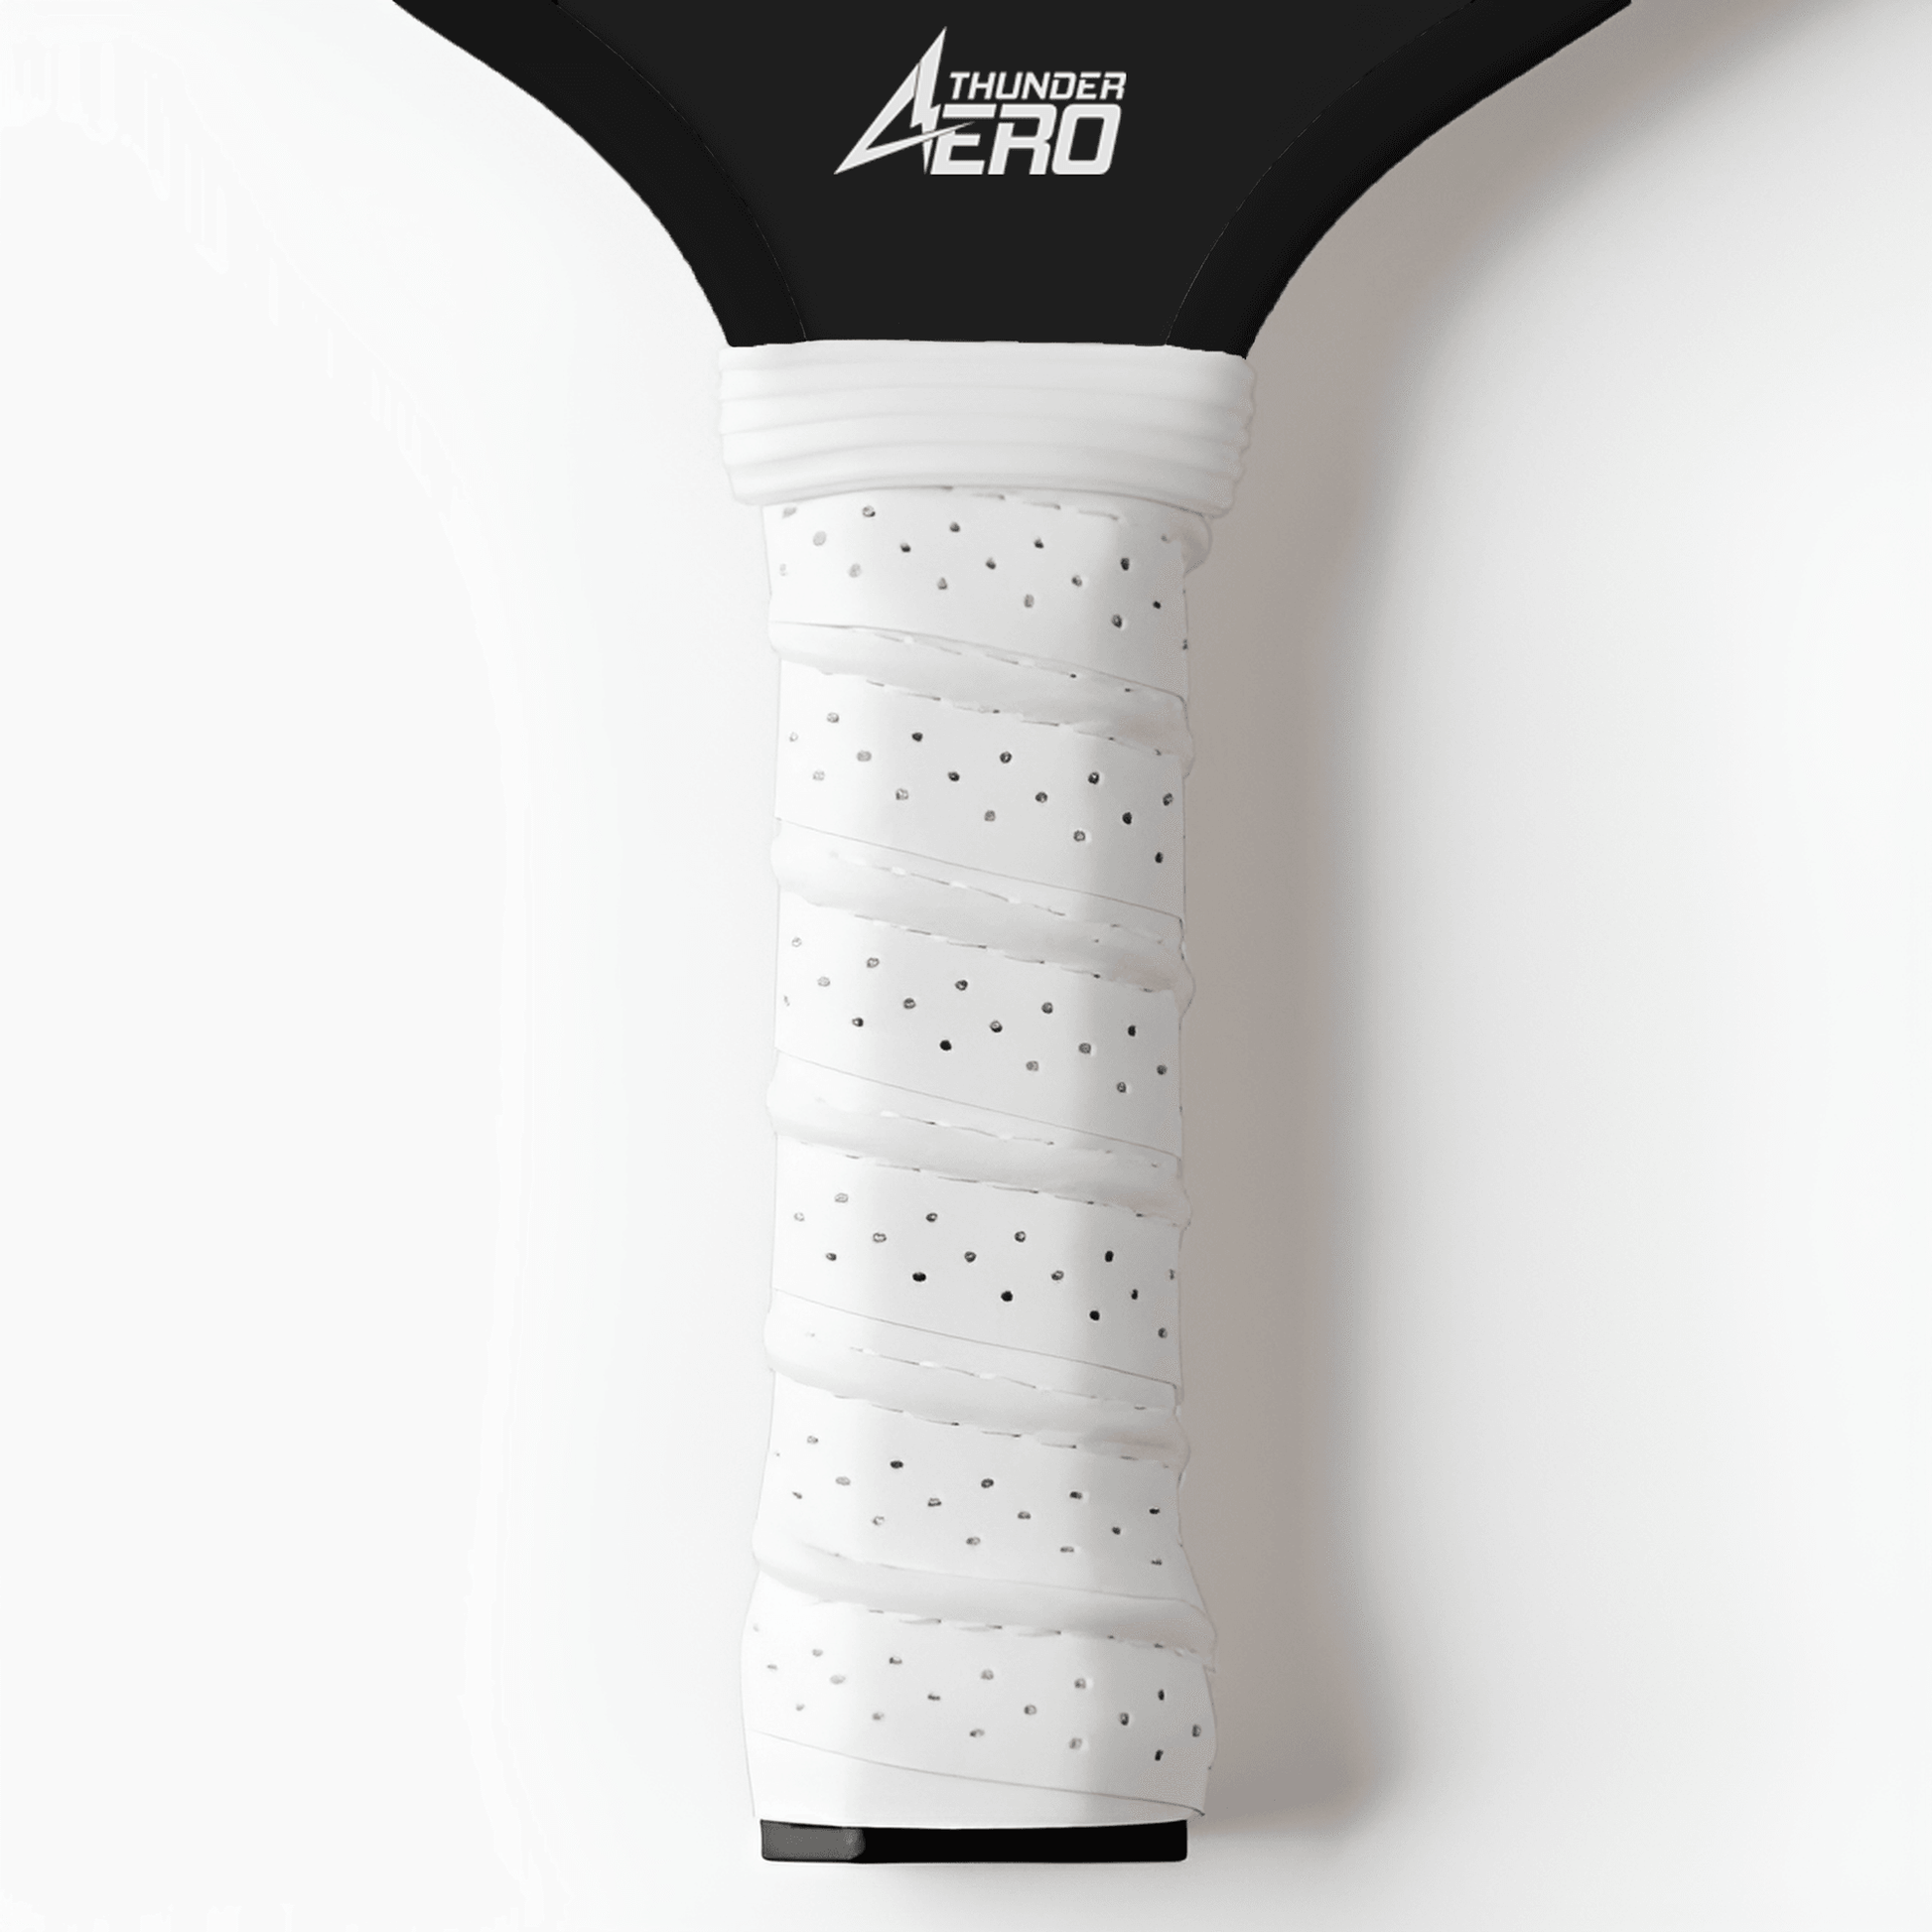 Aero Thunder Pickleball Paddle - Enhanced Grip for Control and Comfort